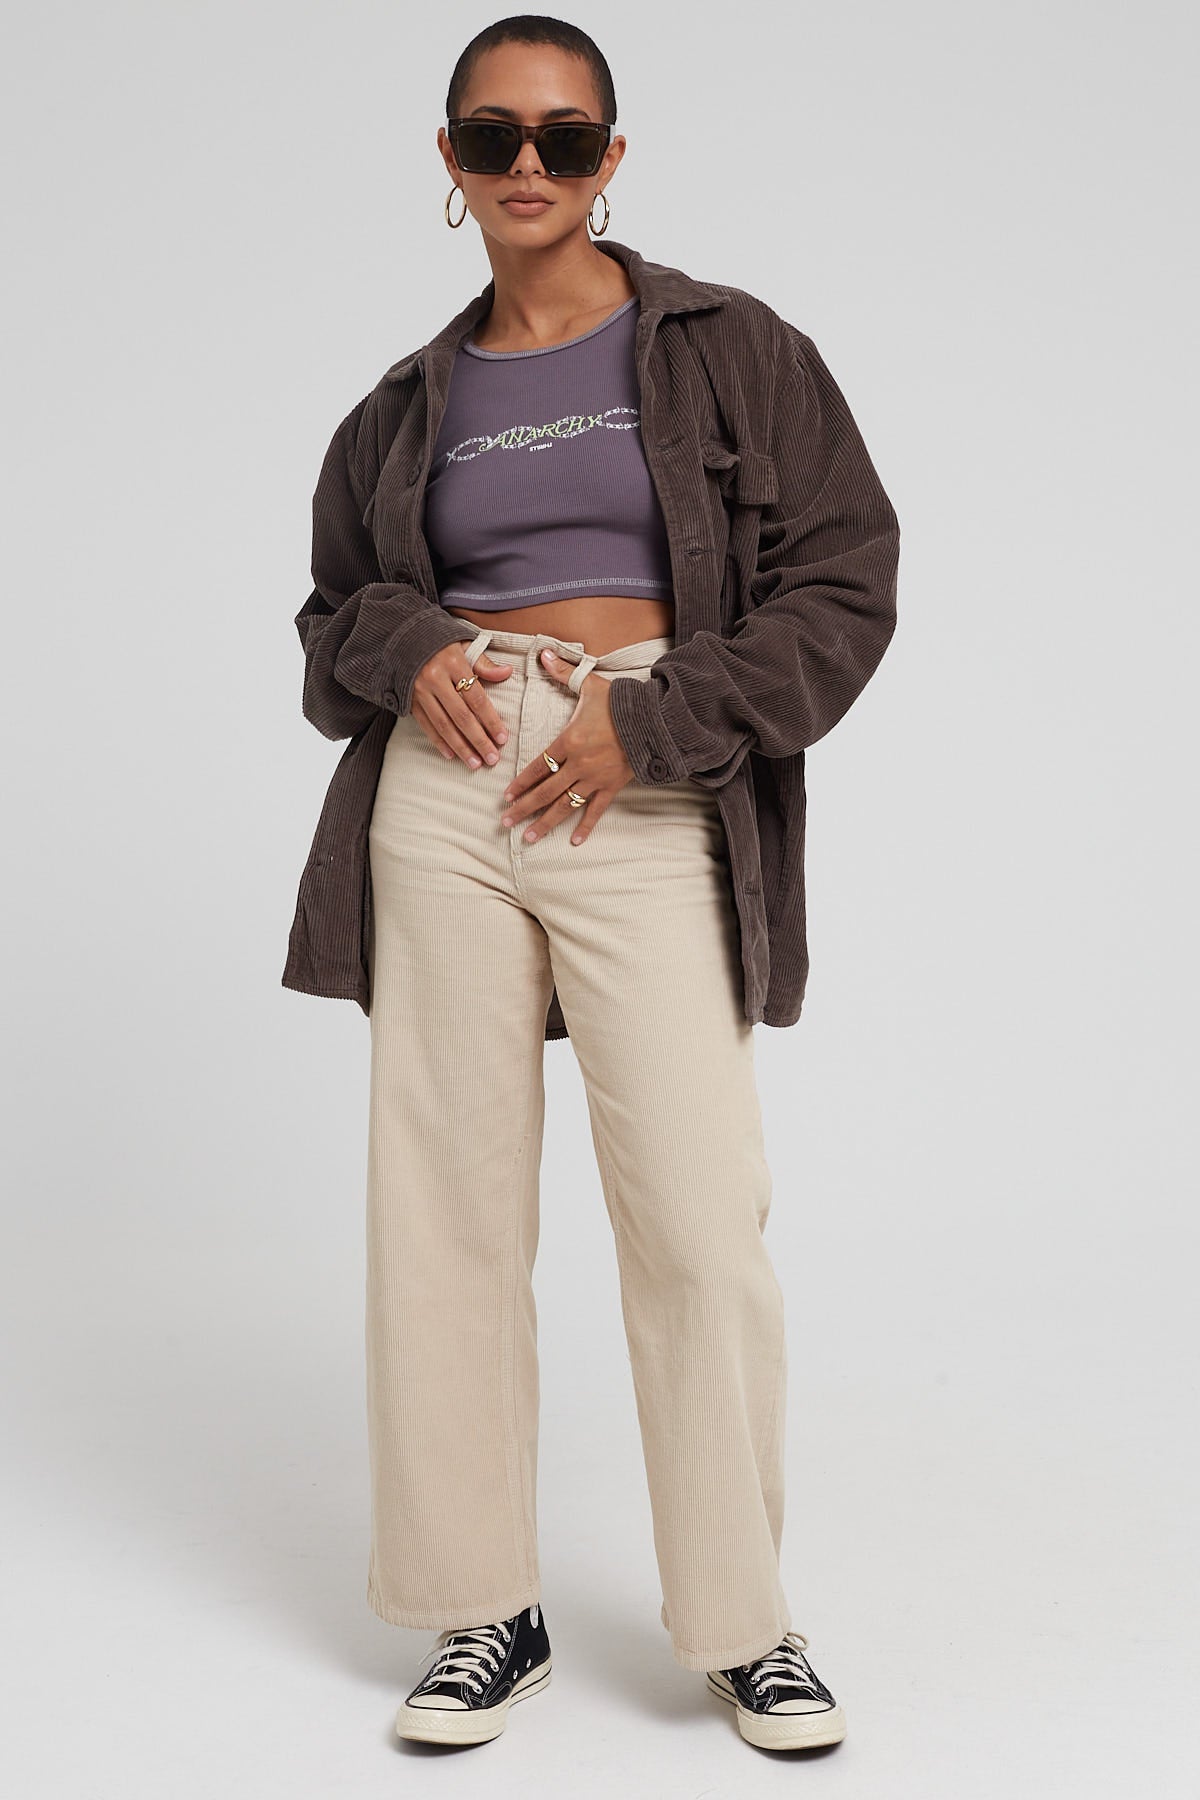 Thrills Holly Cord Pant Soft Tan – Universal Store